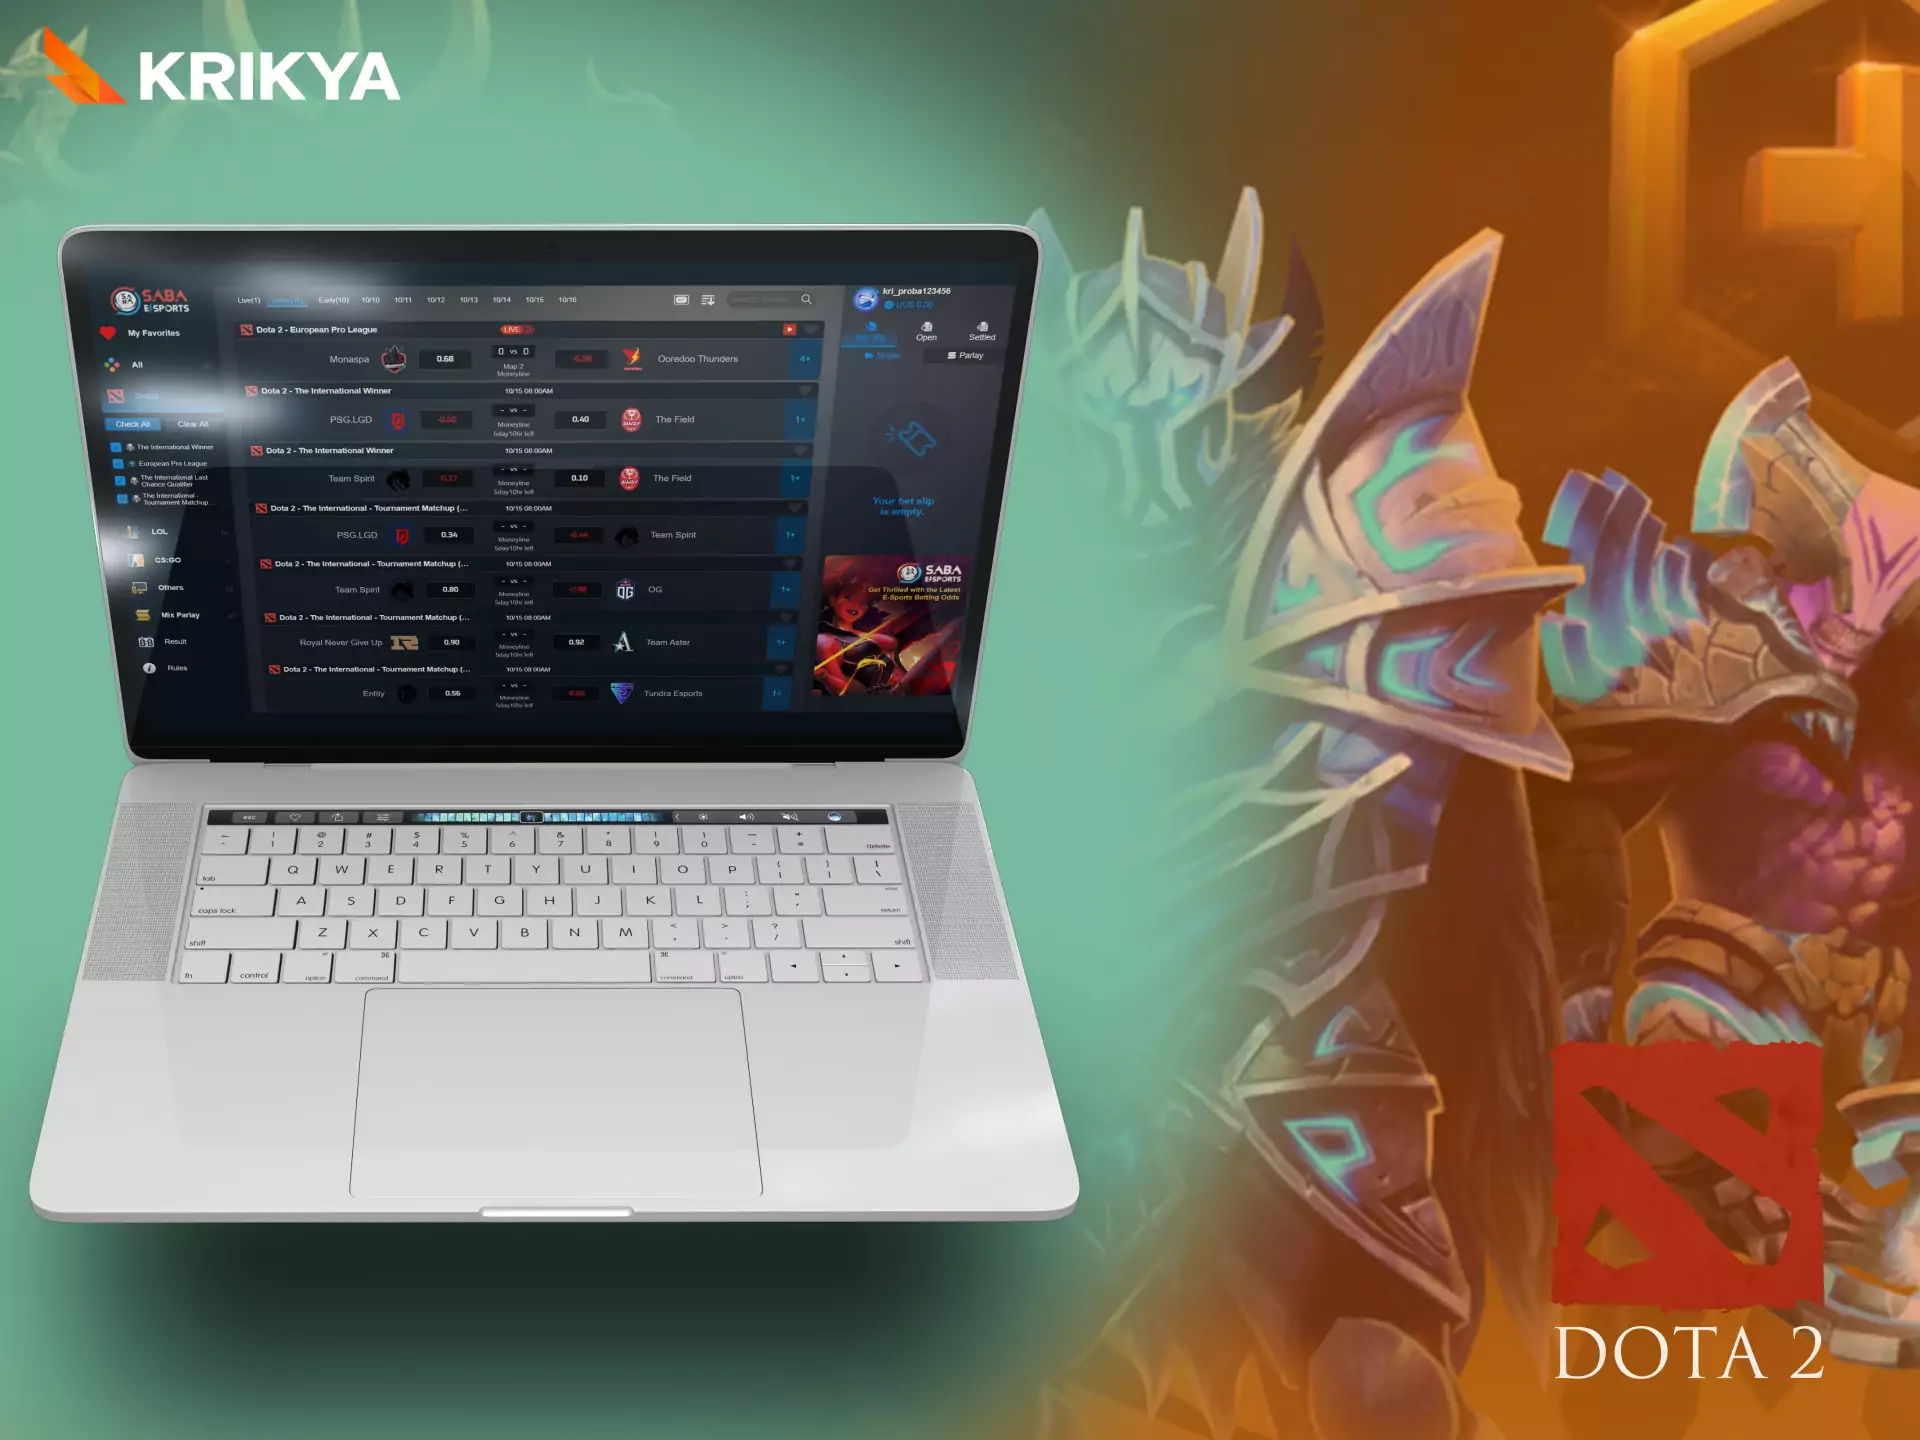 If you are a Dota 2 fan, then place bets on Krikya.